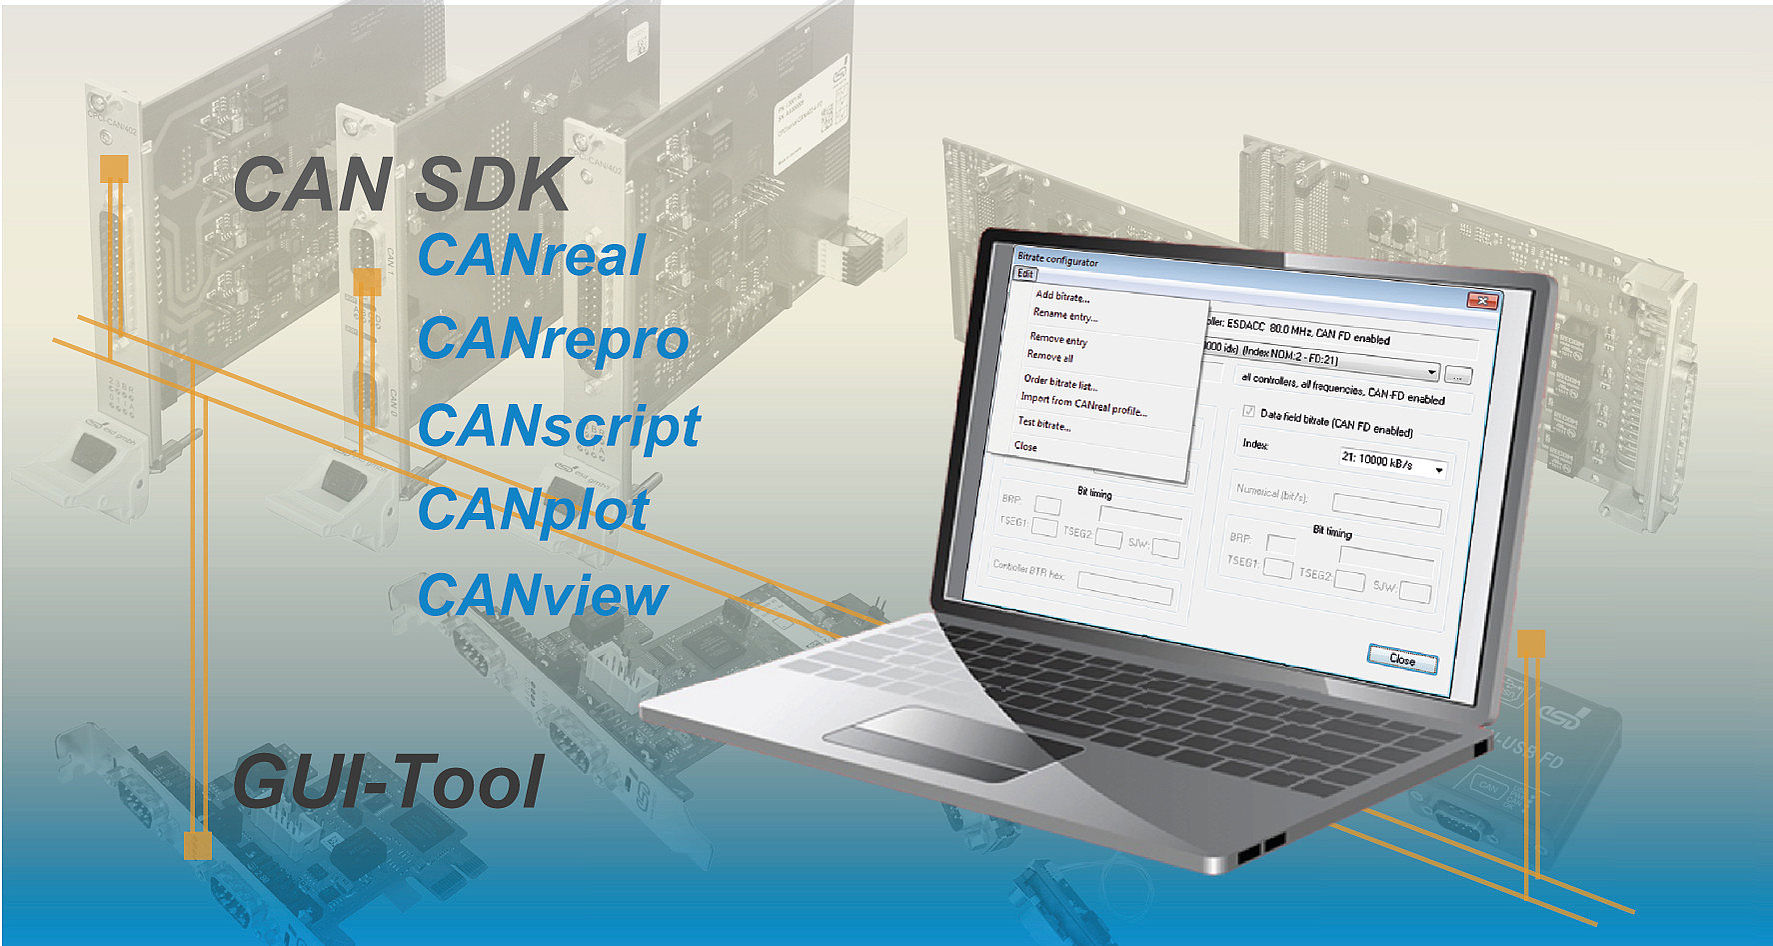 Free Tools for quick Set Up and Operation of CAN Networks